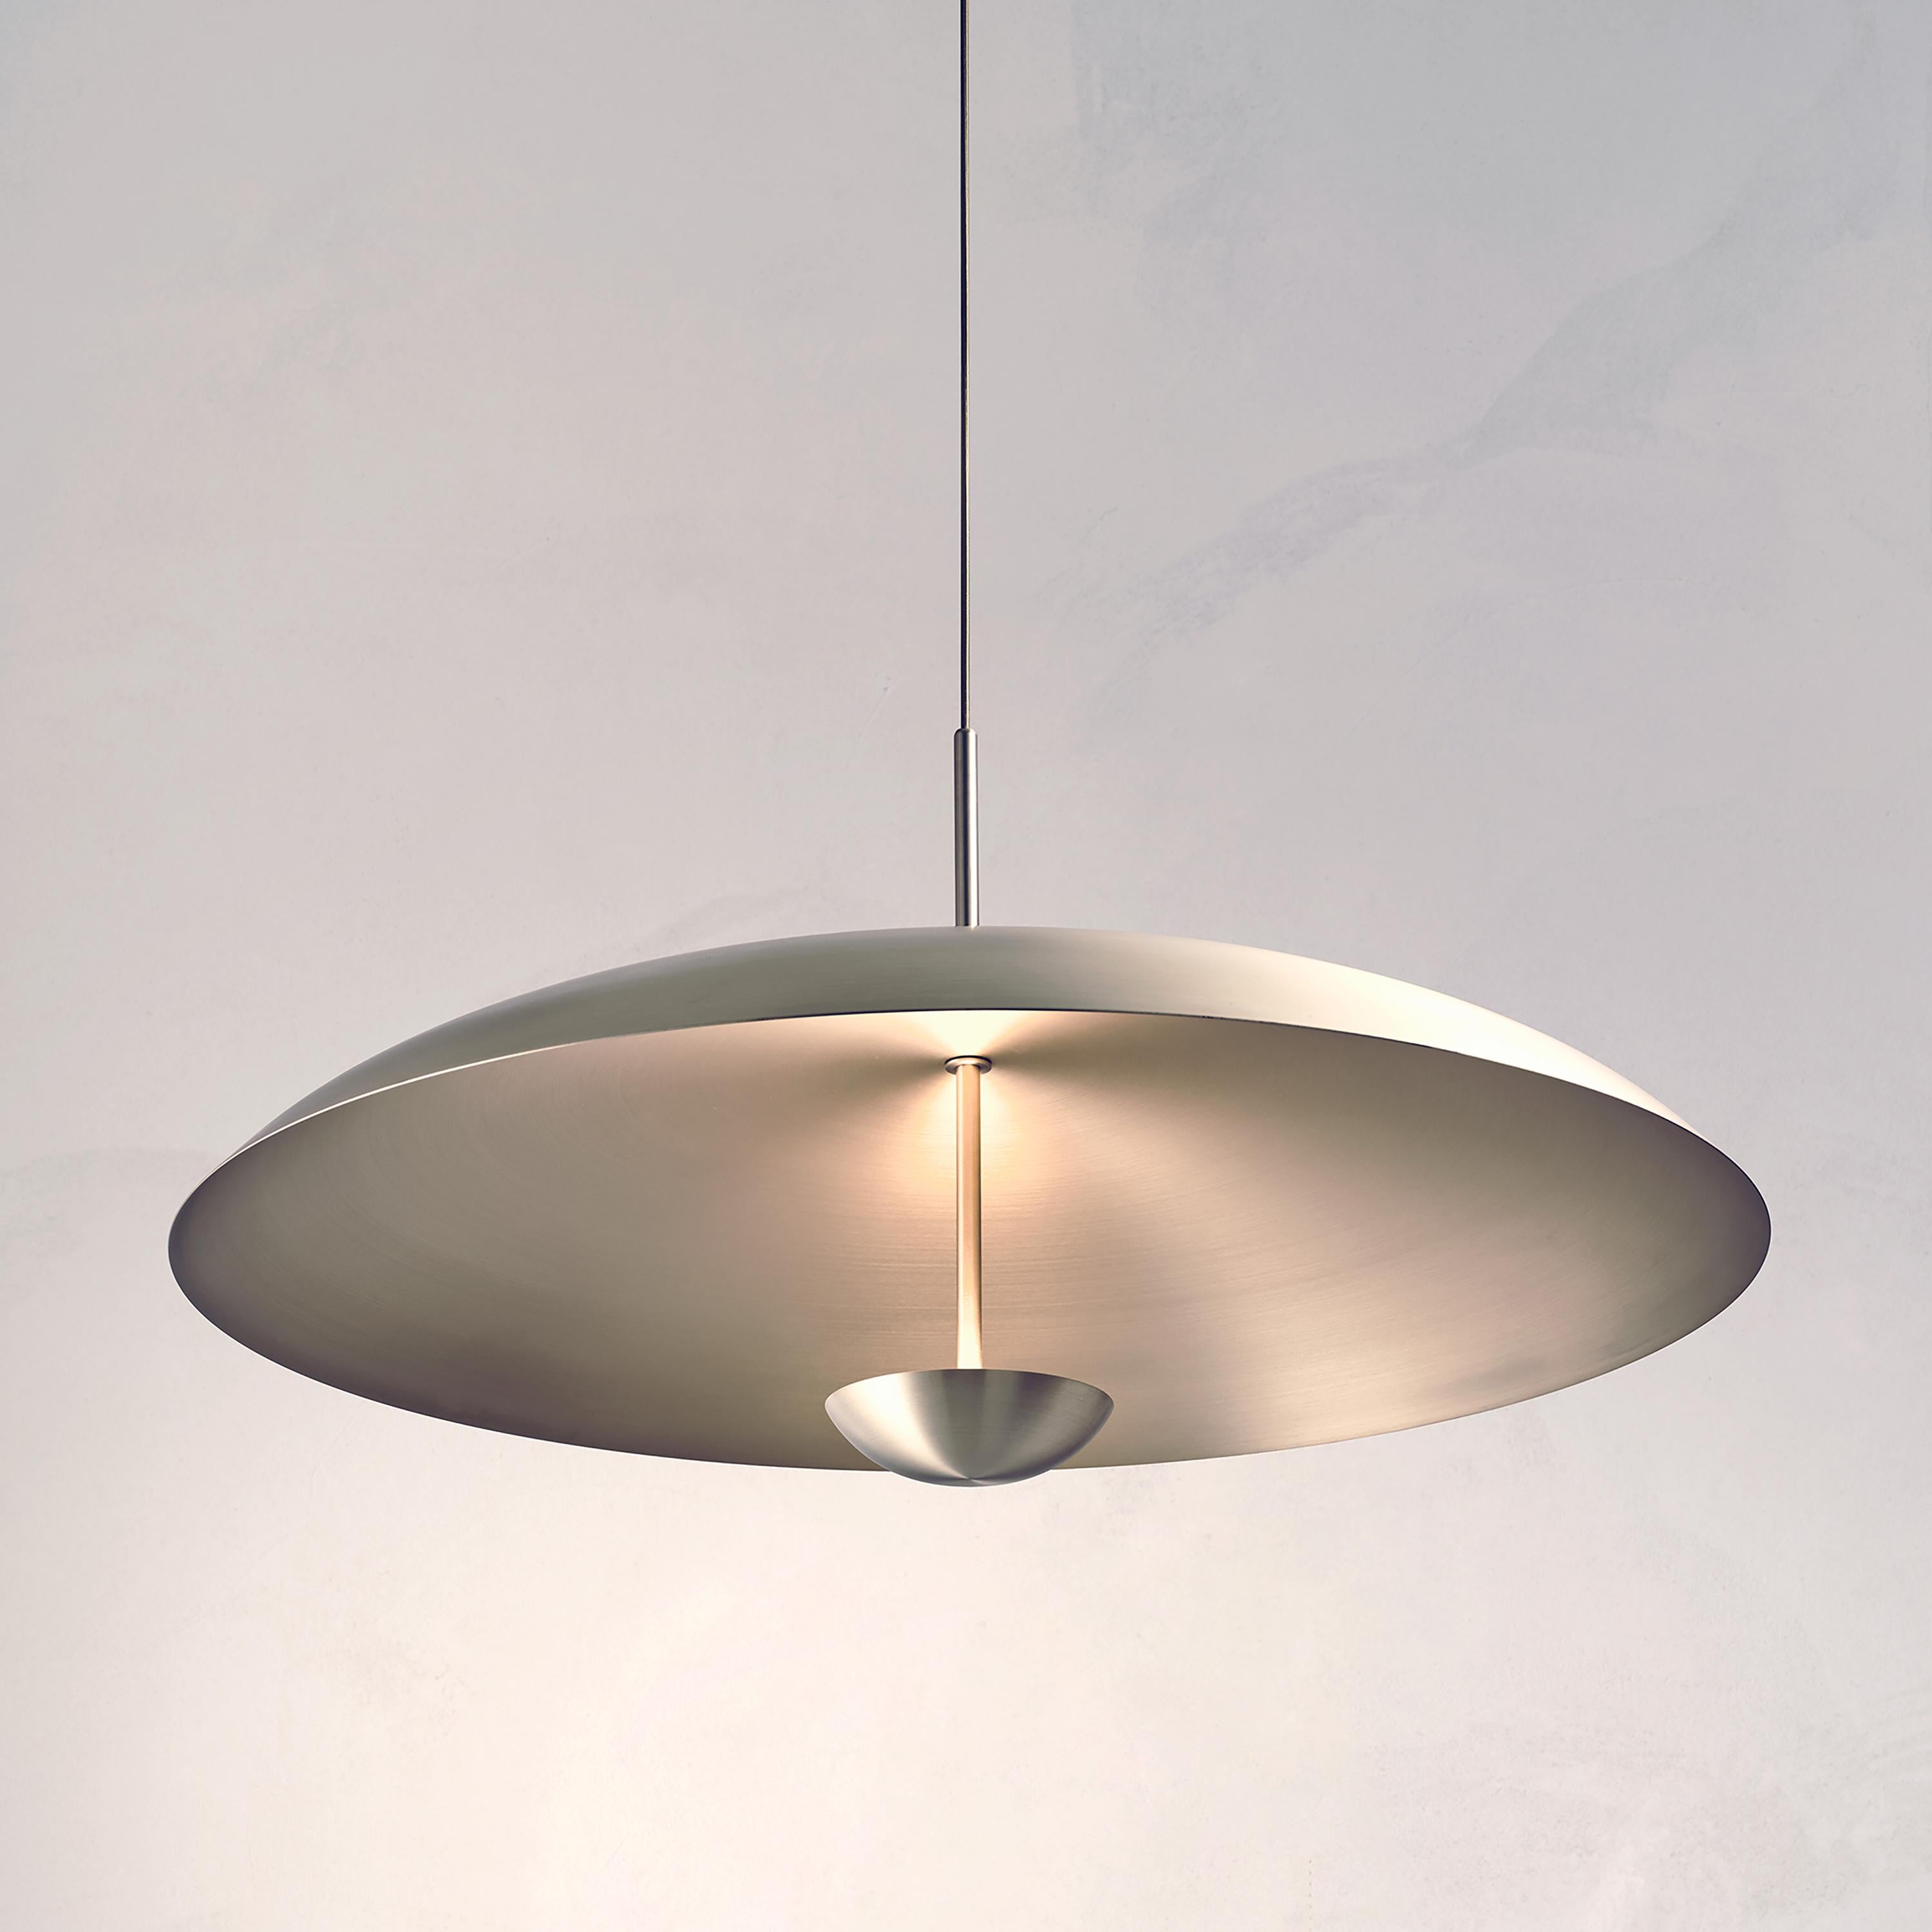 Inspired by planet-like shapes and textures, the Cosmic collection plays with both metal properties and a selection of patina finishes.
 
Composed with two carefully hand-spun steel plates, the Seleno Pendant preserves the beautiful texture and